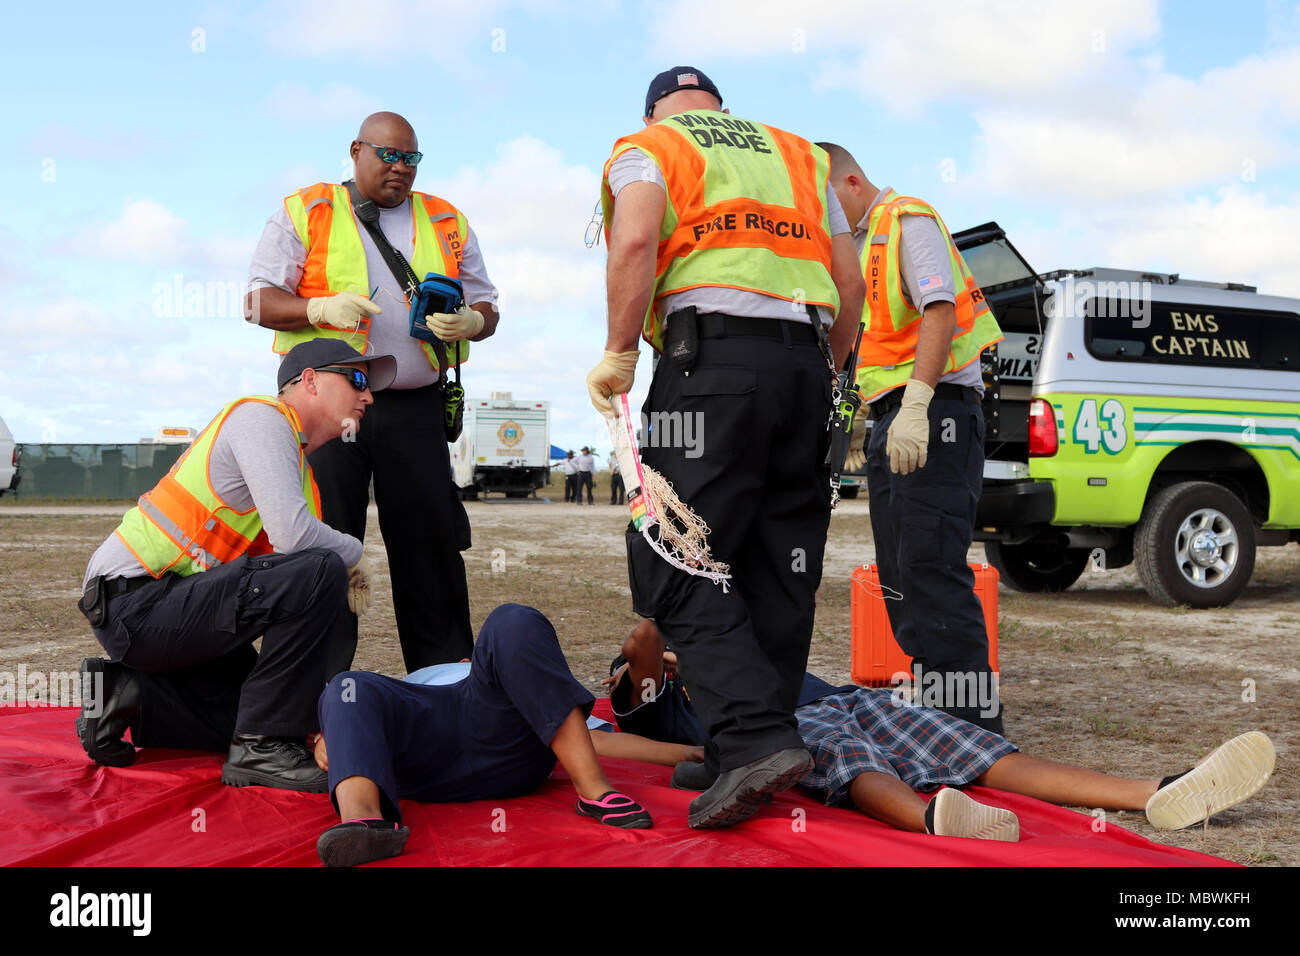 Members of the Miami-Dade Fire Department Fire and Rescue team, respond to the simulated injures of a volunteer during a Joint Training Exercise hosted by the Miami-Dade Fire Department and Homestead-Miami Speedway in Miami, Fla. Jan. 11, 2018. This JTE focused on building response capabilities and seamless the transition between the local first responders and the follow-on support provided by the National Guard and Active duty soldiers. (U. S. Army Photo by Spc. Samuel Brooks) Stock Photo